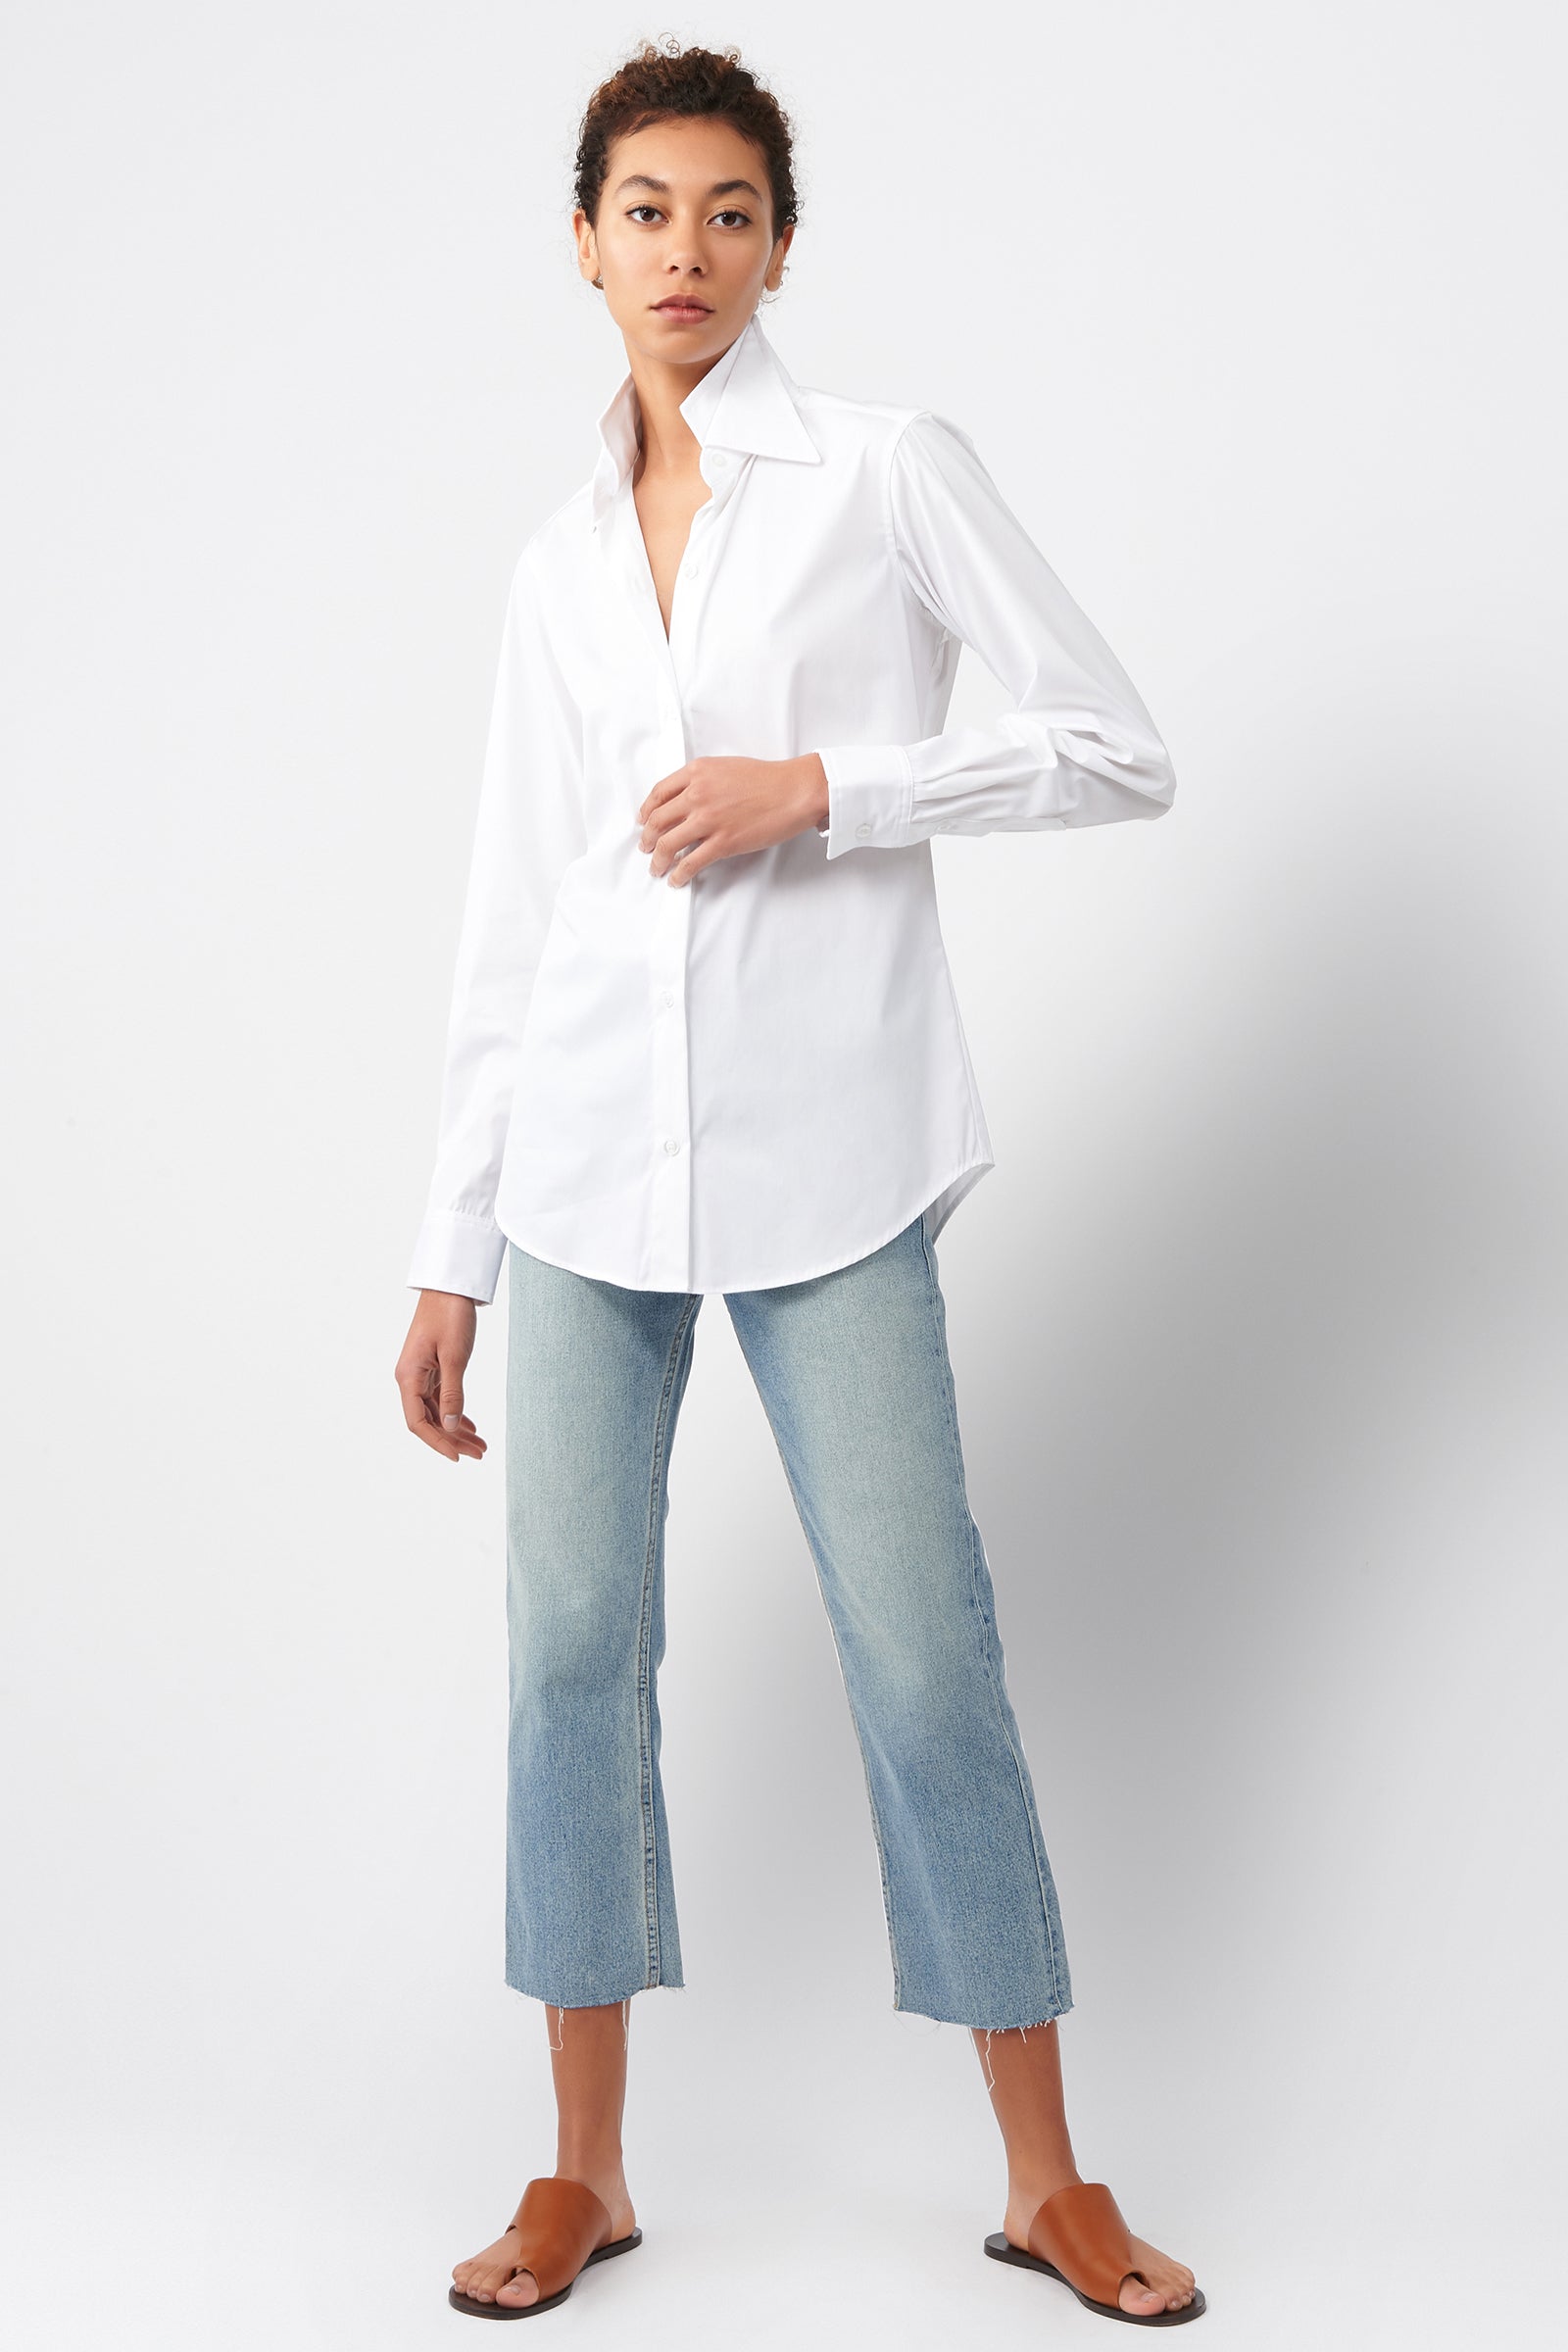 Kal Rieman Double Collar Shirt in White Cotton on Model Full Front View